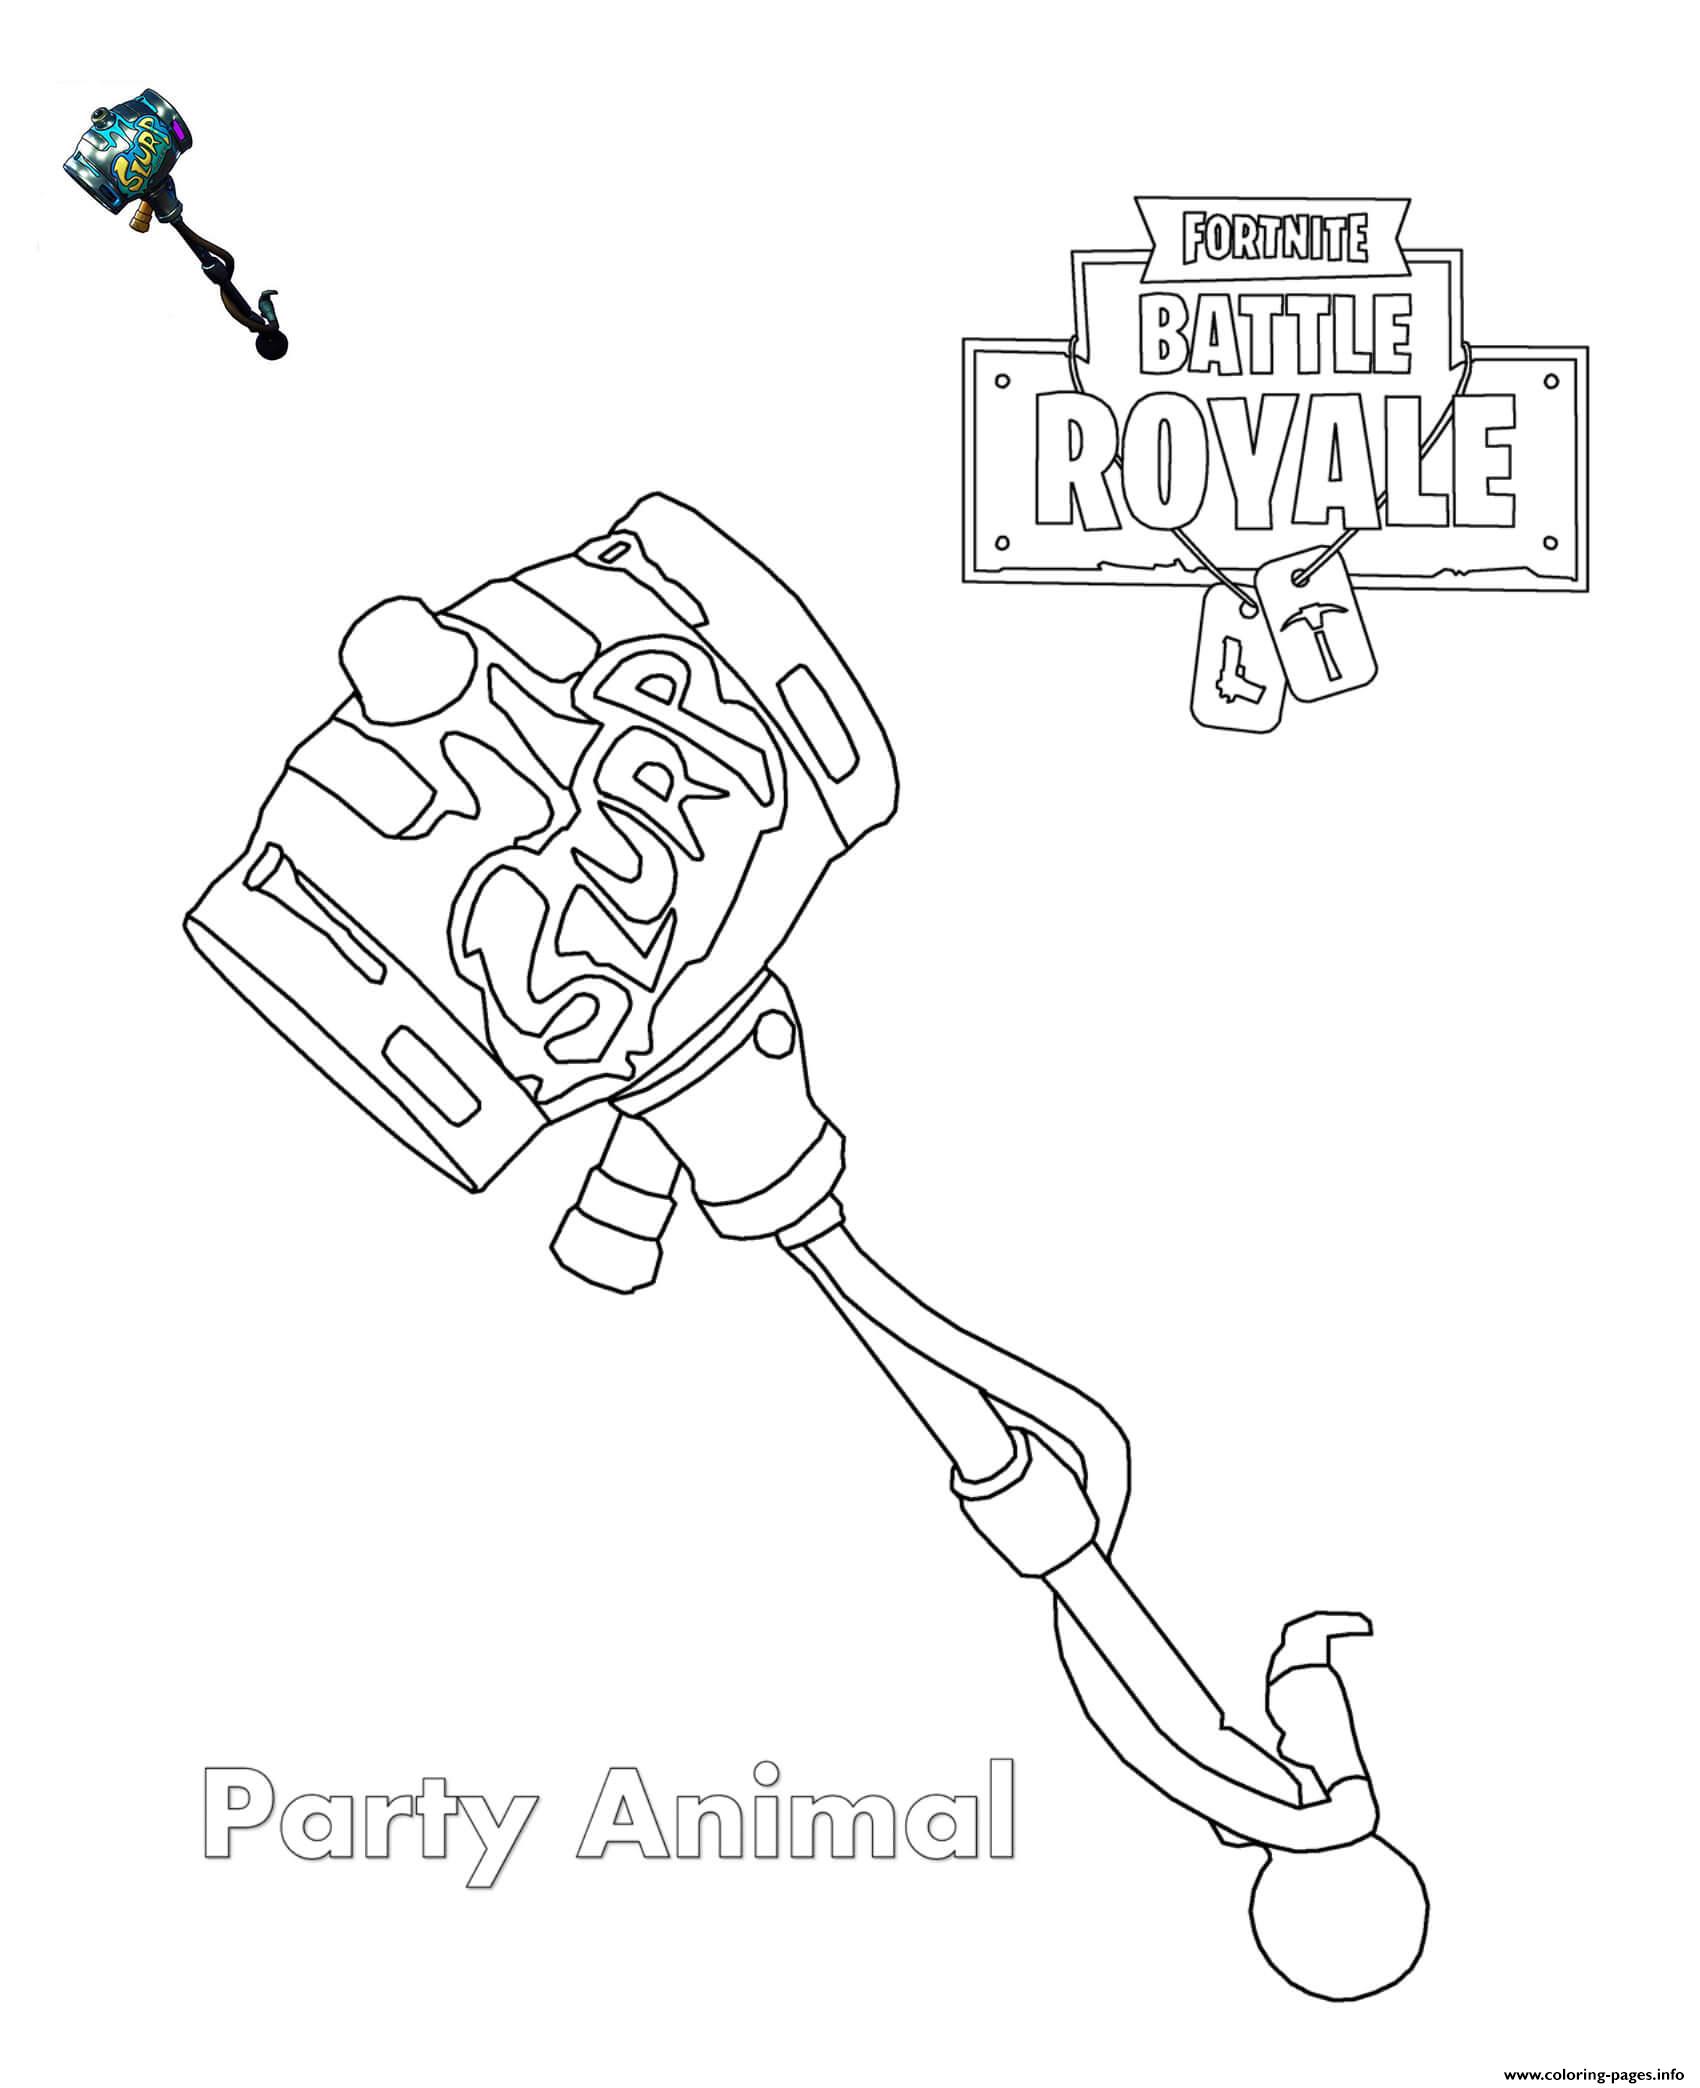 download party animal fortnite